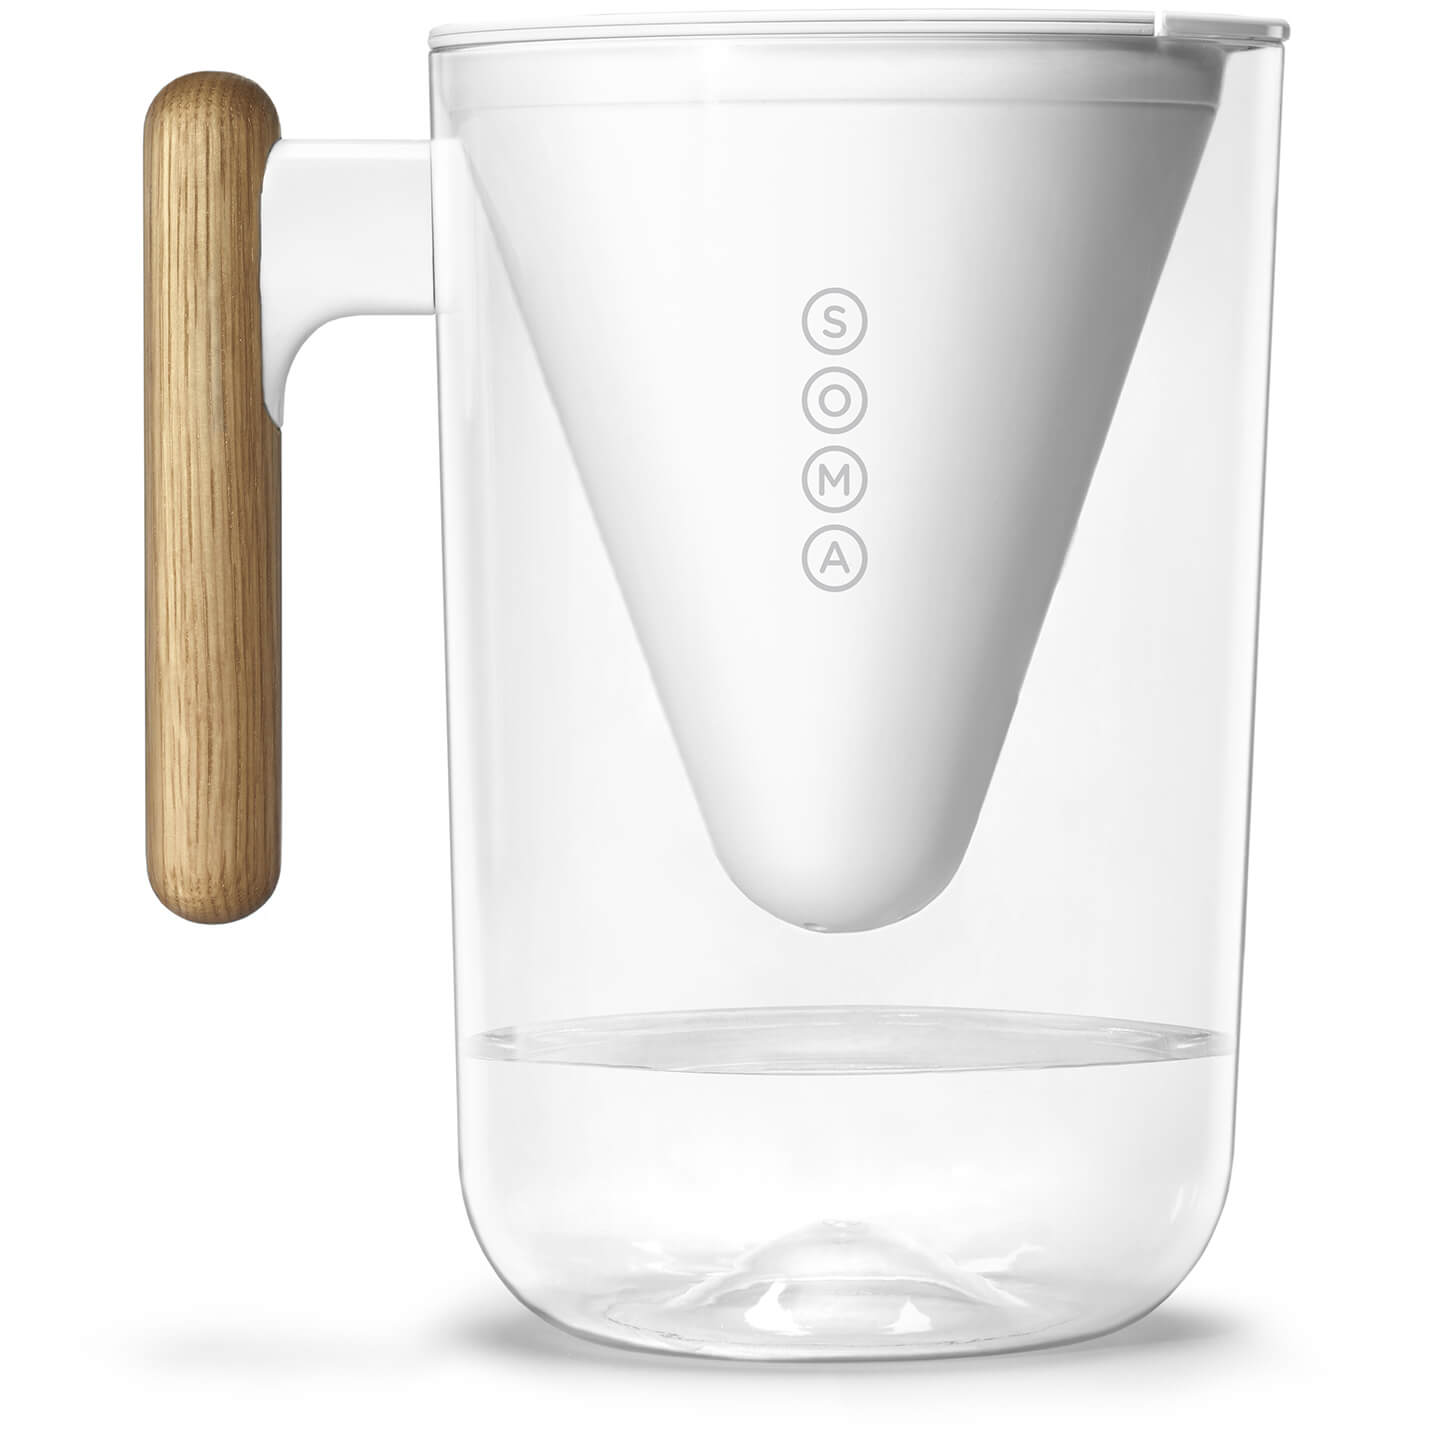 Soma 10-Cup Pitcher - 2.25L - White